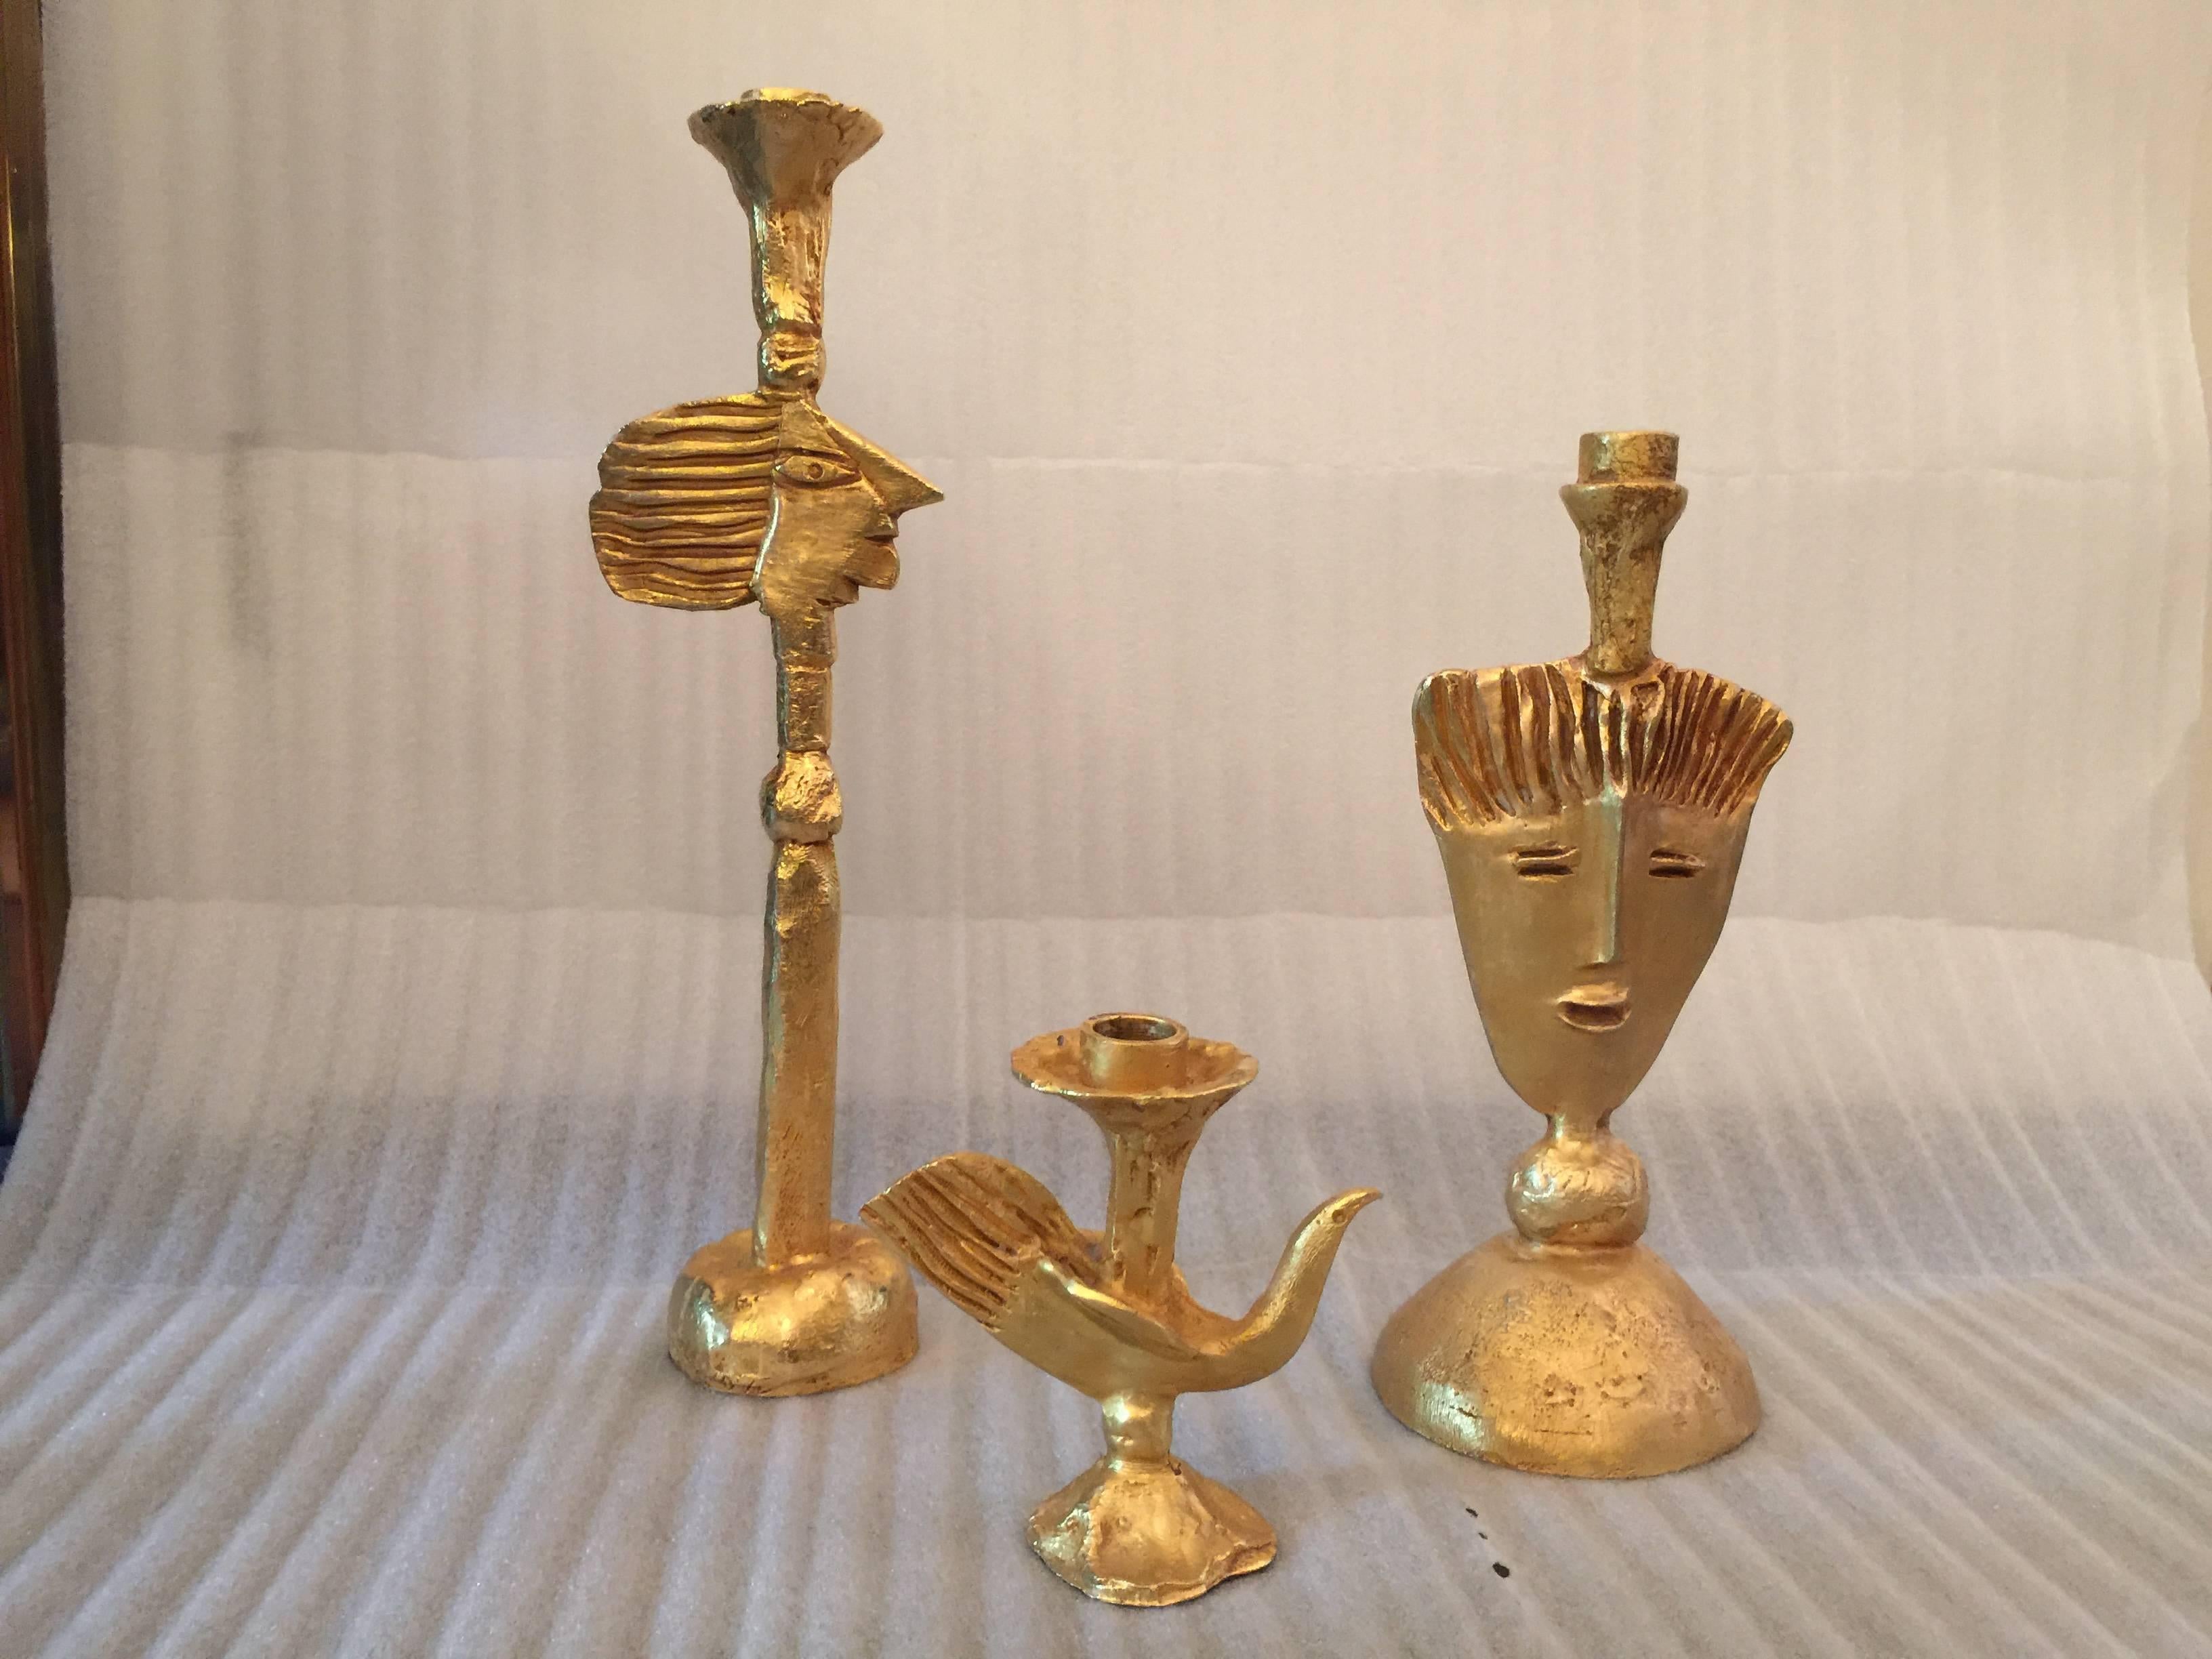 Set of 3 Tiered Gilt Bronze Candleholders by Pierre Casenove for Fondica In Good Condition For Sale In East Hampton, NY